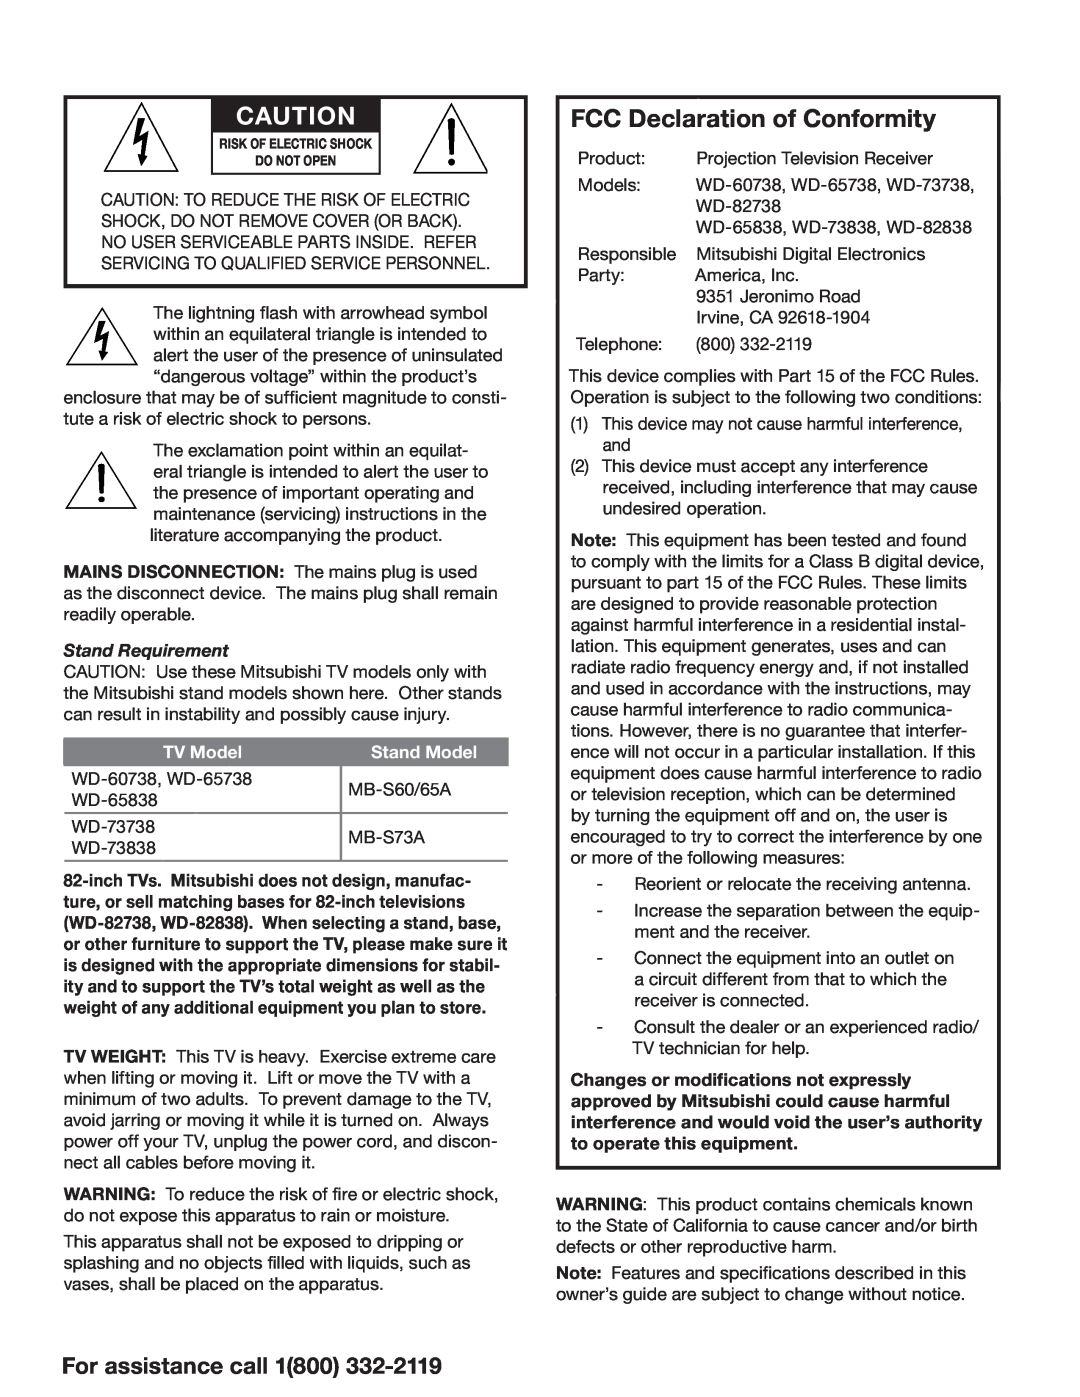 Mitsubishi Electronics 838 manual FCC Declaration of Conformity, For assistance call 